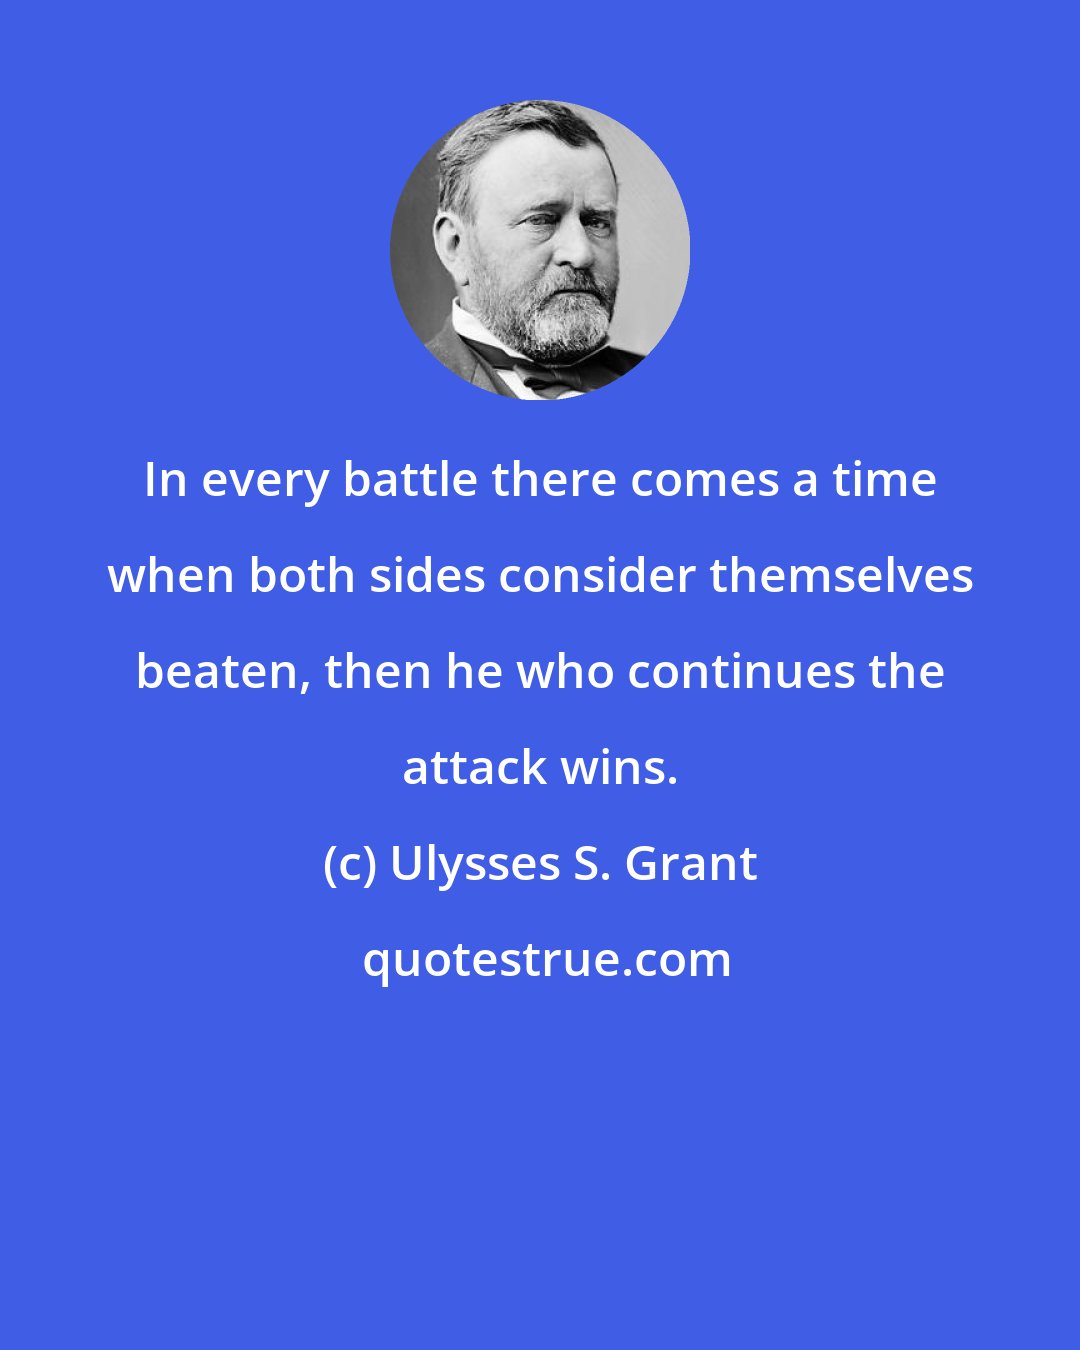 Ulysses S. Grant: In every battle there comes a time when both sides consider themselves beaten, then he who continues the attack wins.